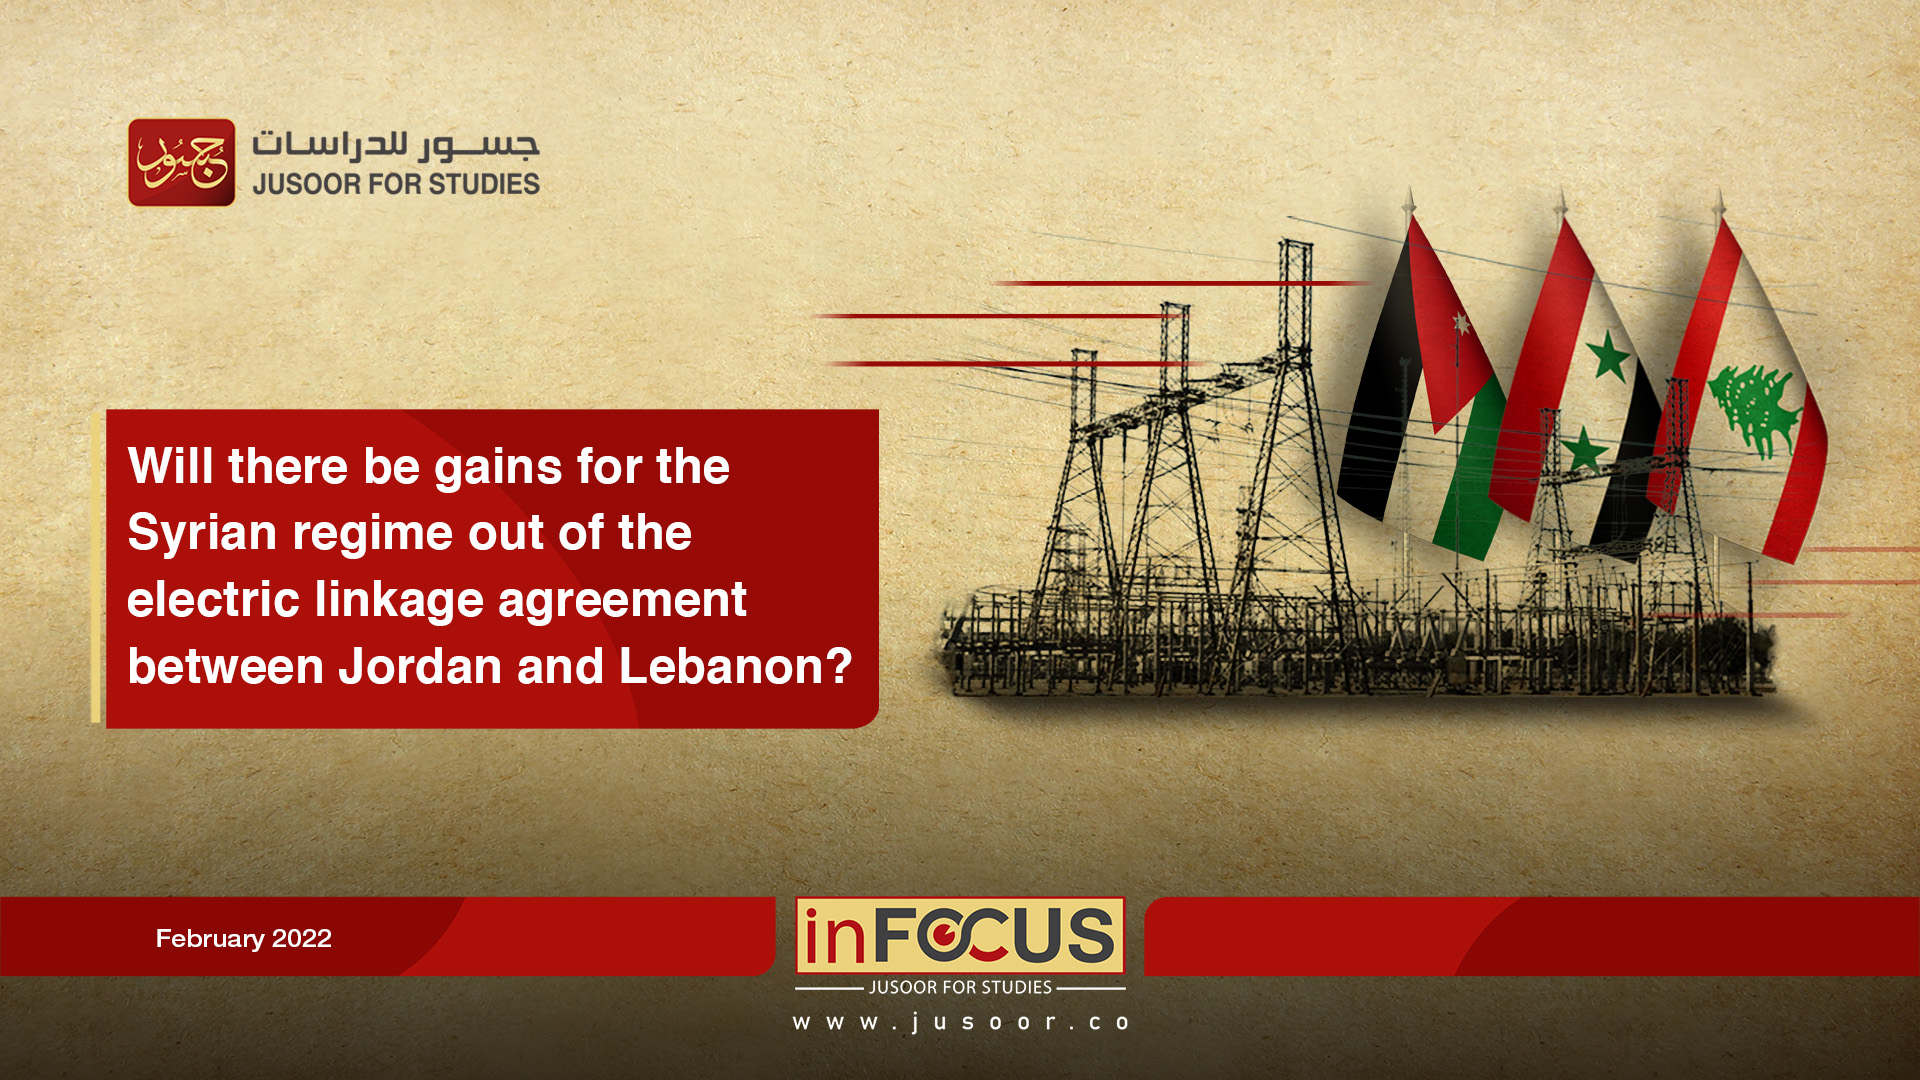 Will there be gains for the Syrian regime out of the electric linkage agreement between Jordan and Lebanon?